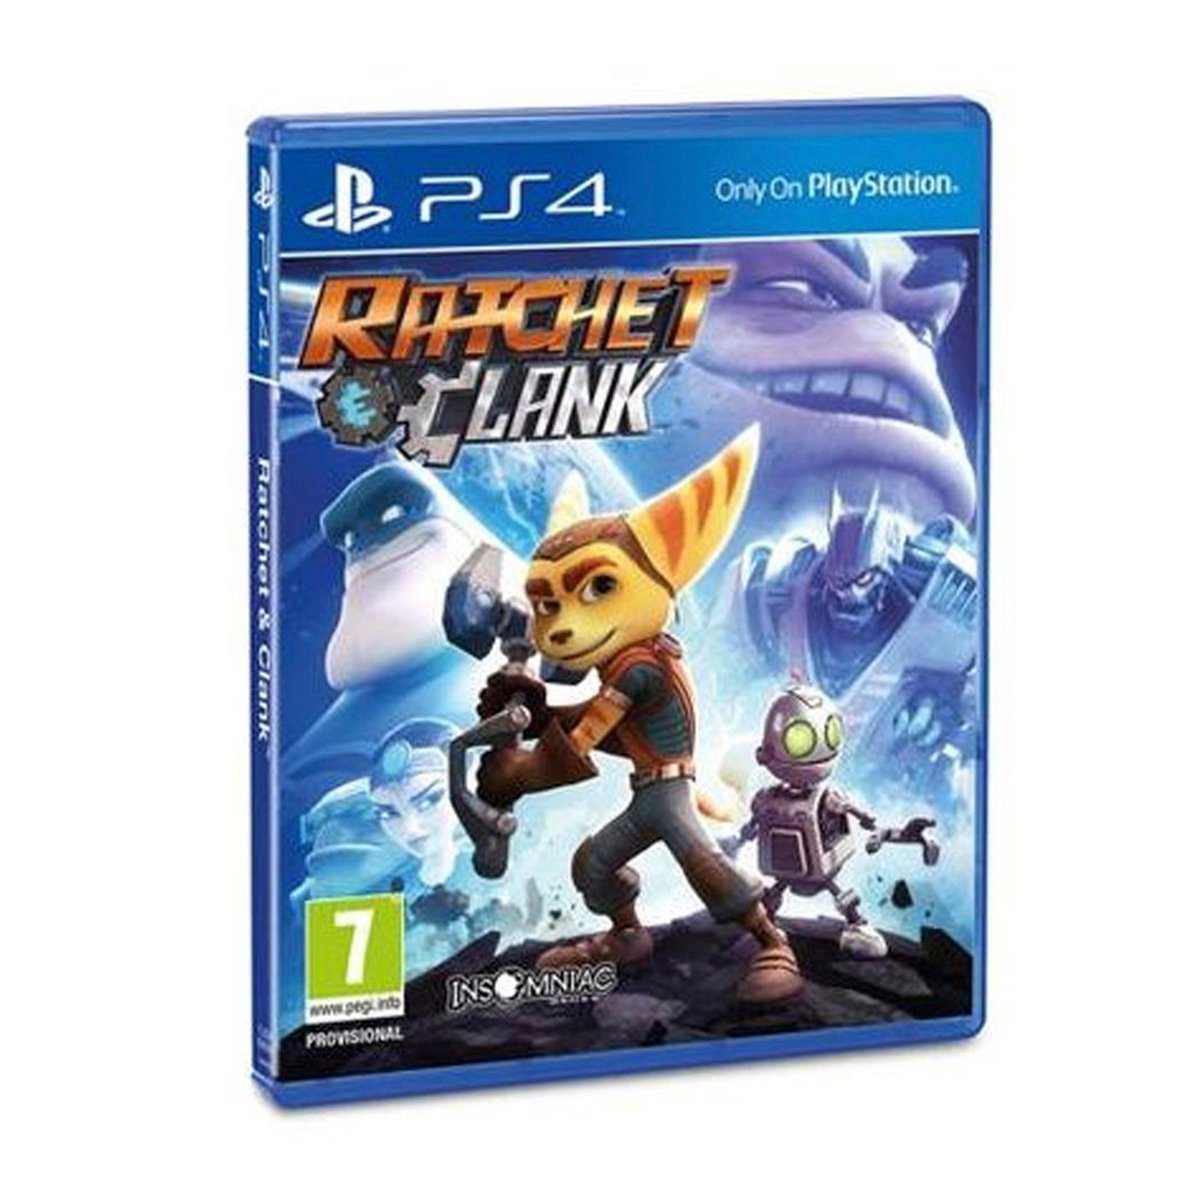 Sony PS4 500GB with Spiderman + Unchartered Collection + Ratchet & Clank + 3 Months PS Subscription (CUH2216A500GBHITS7)